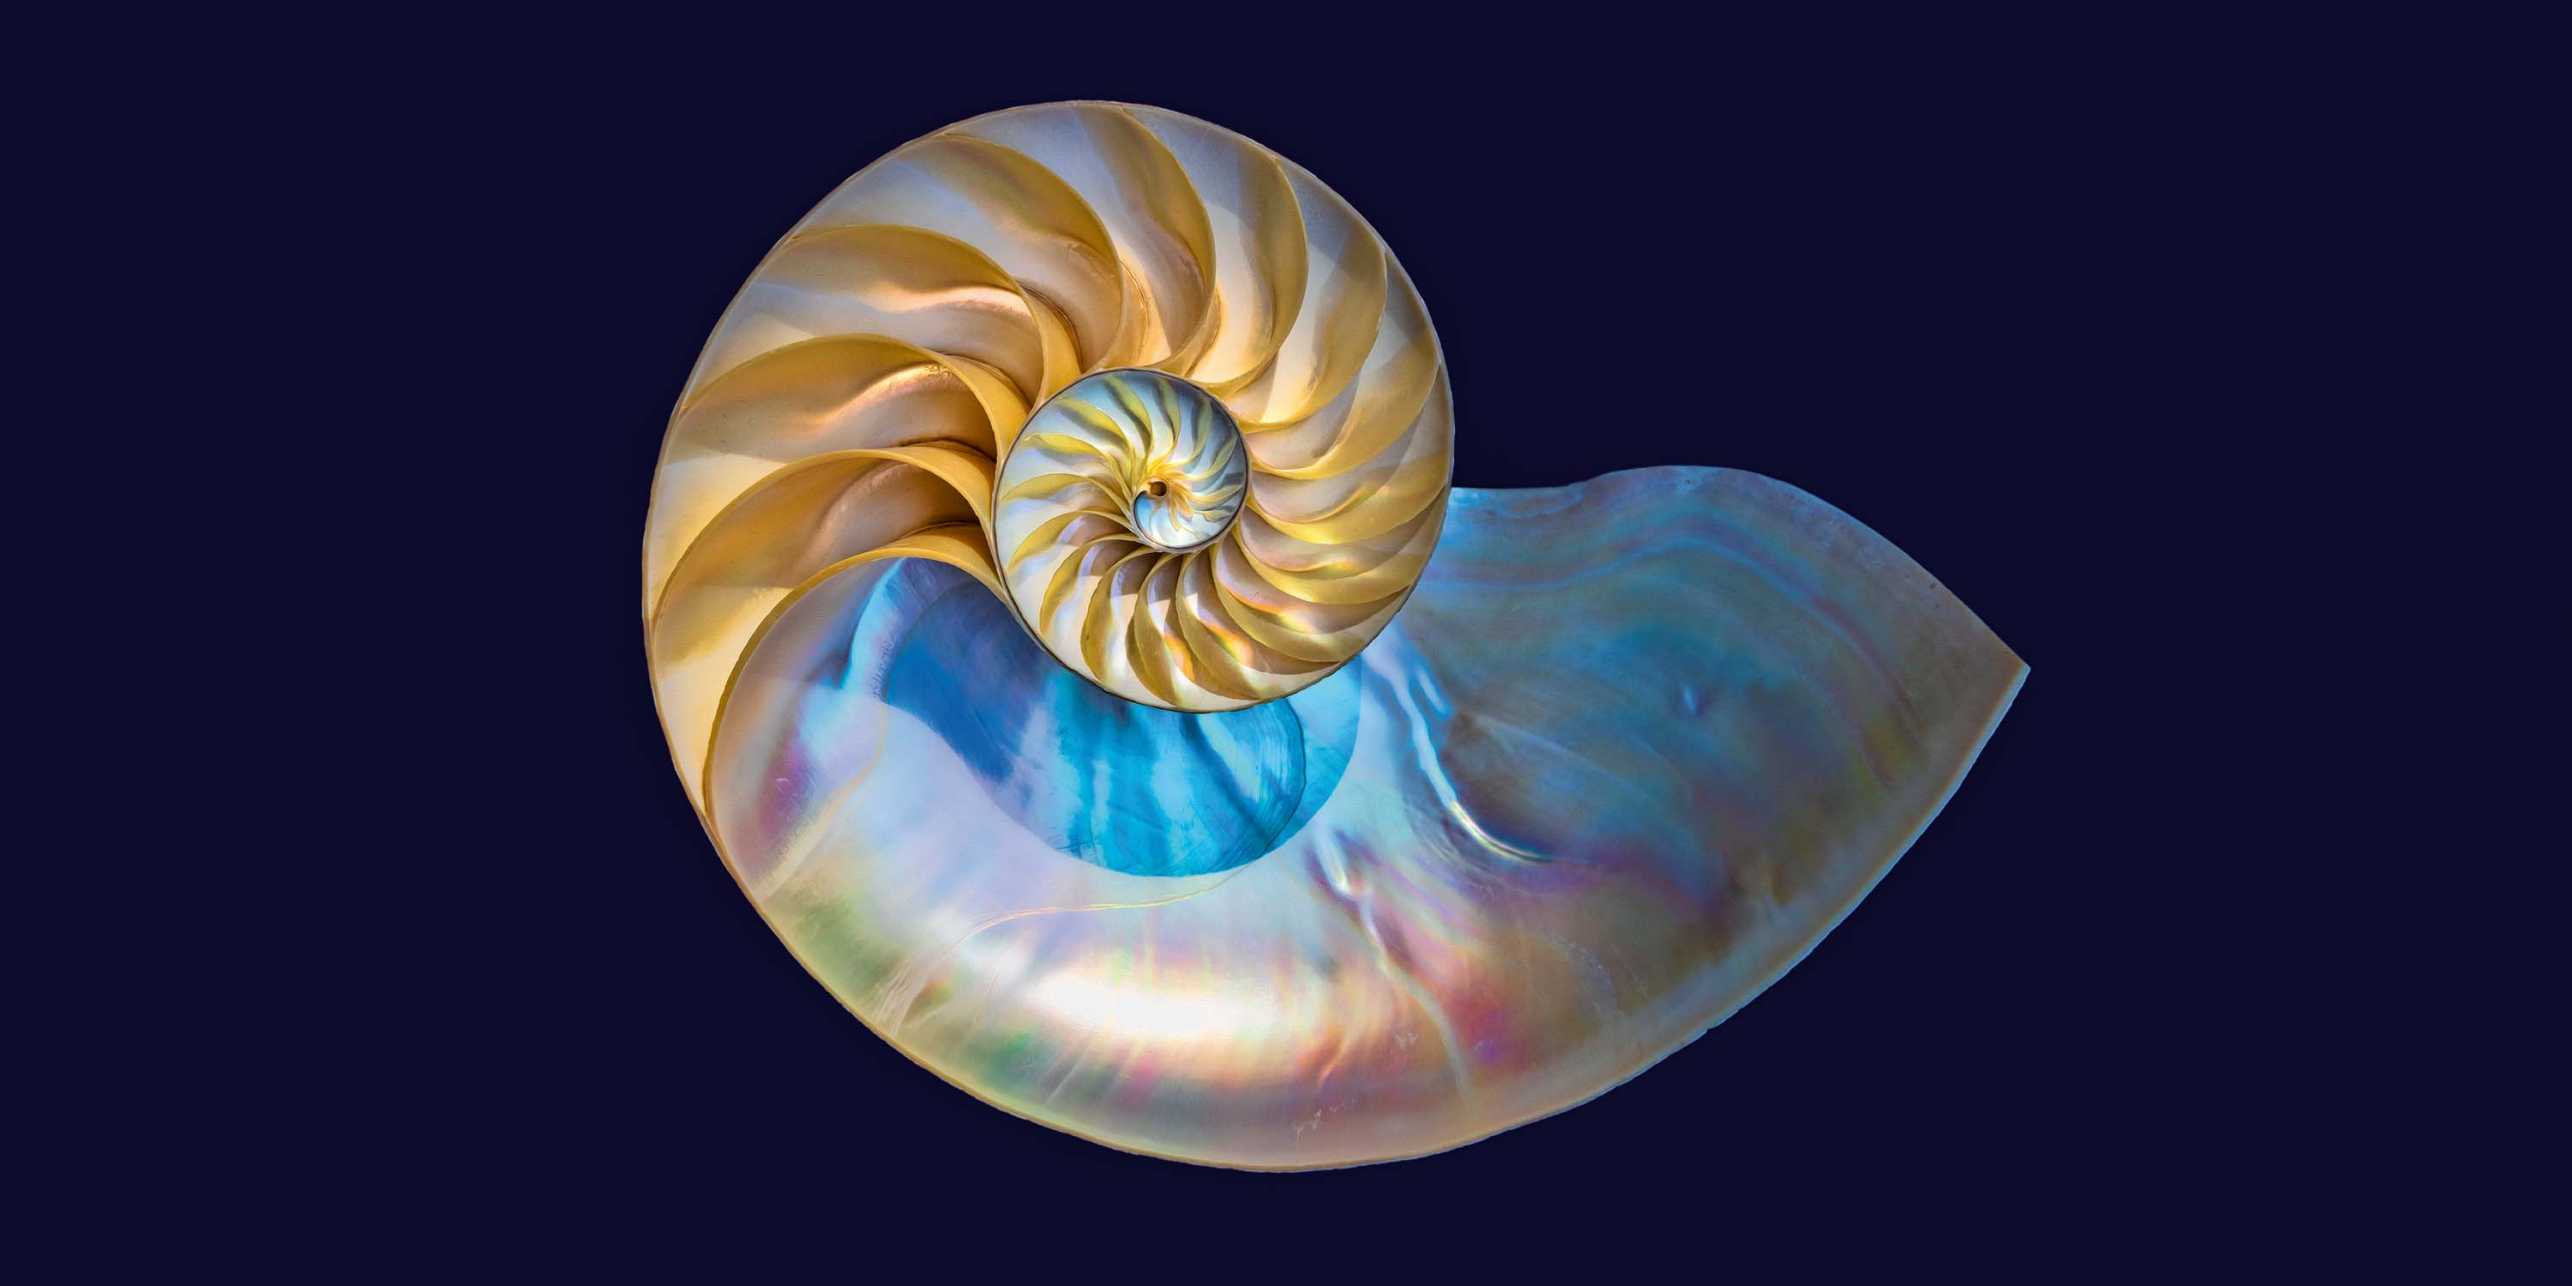 A shimmering shell from the inside